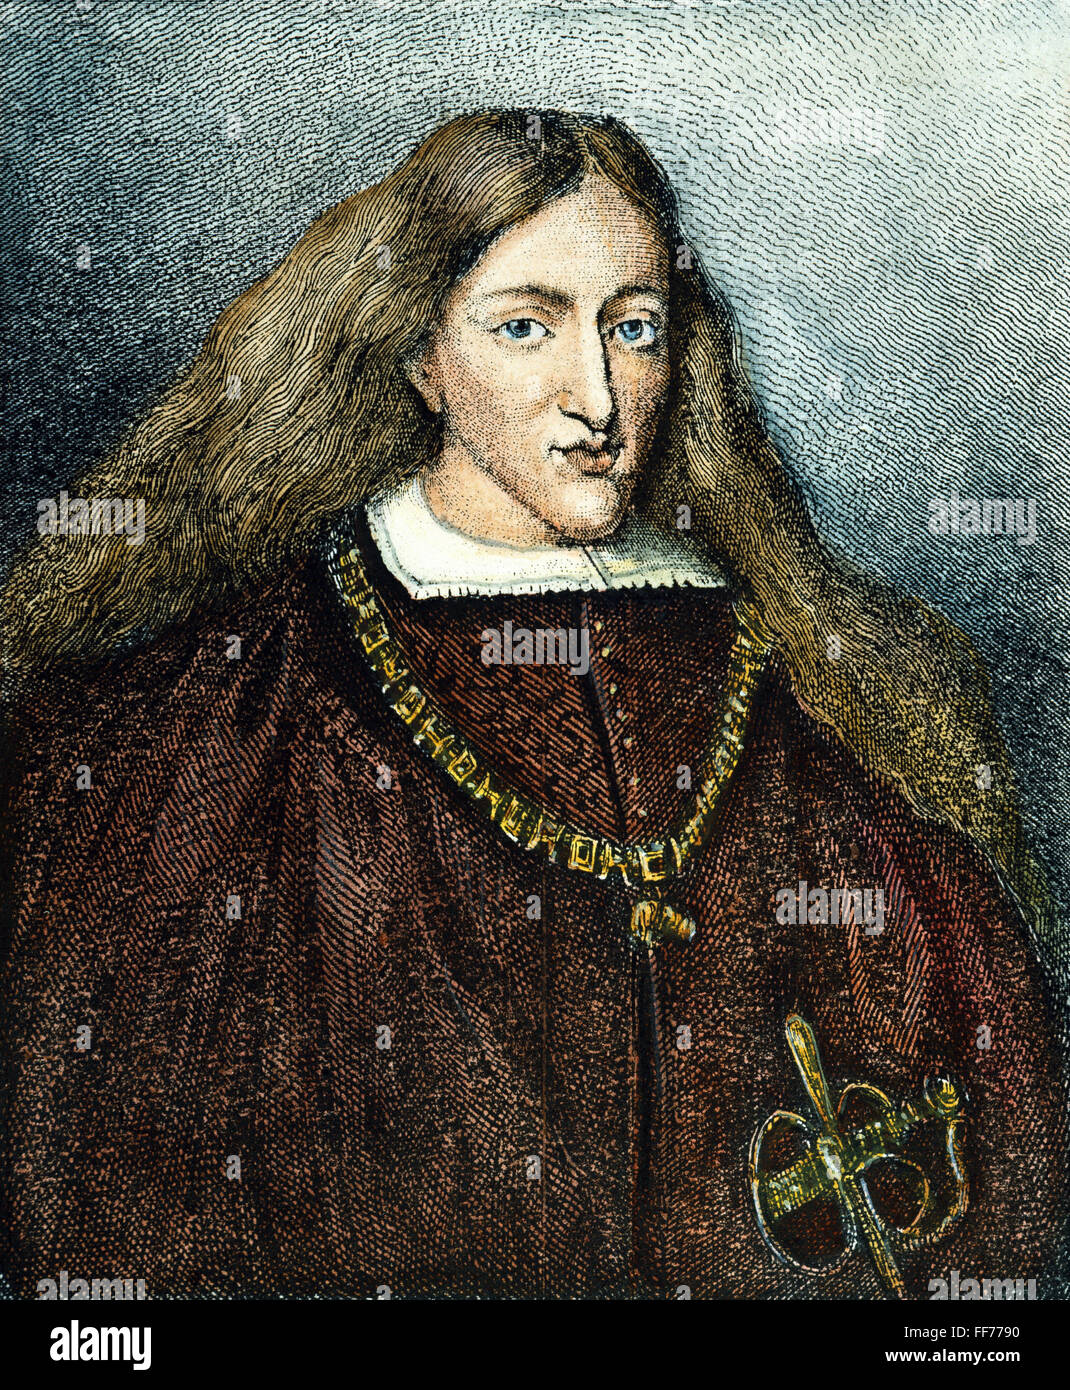 CHARLES II OF SPAIN (1661-1700). /nColored steel engraving, 19th century. Stock Photo